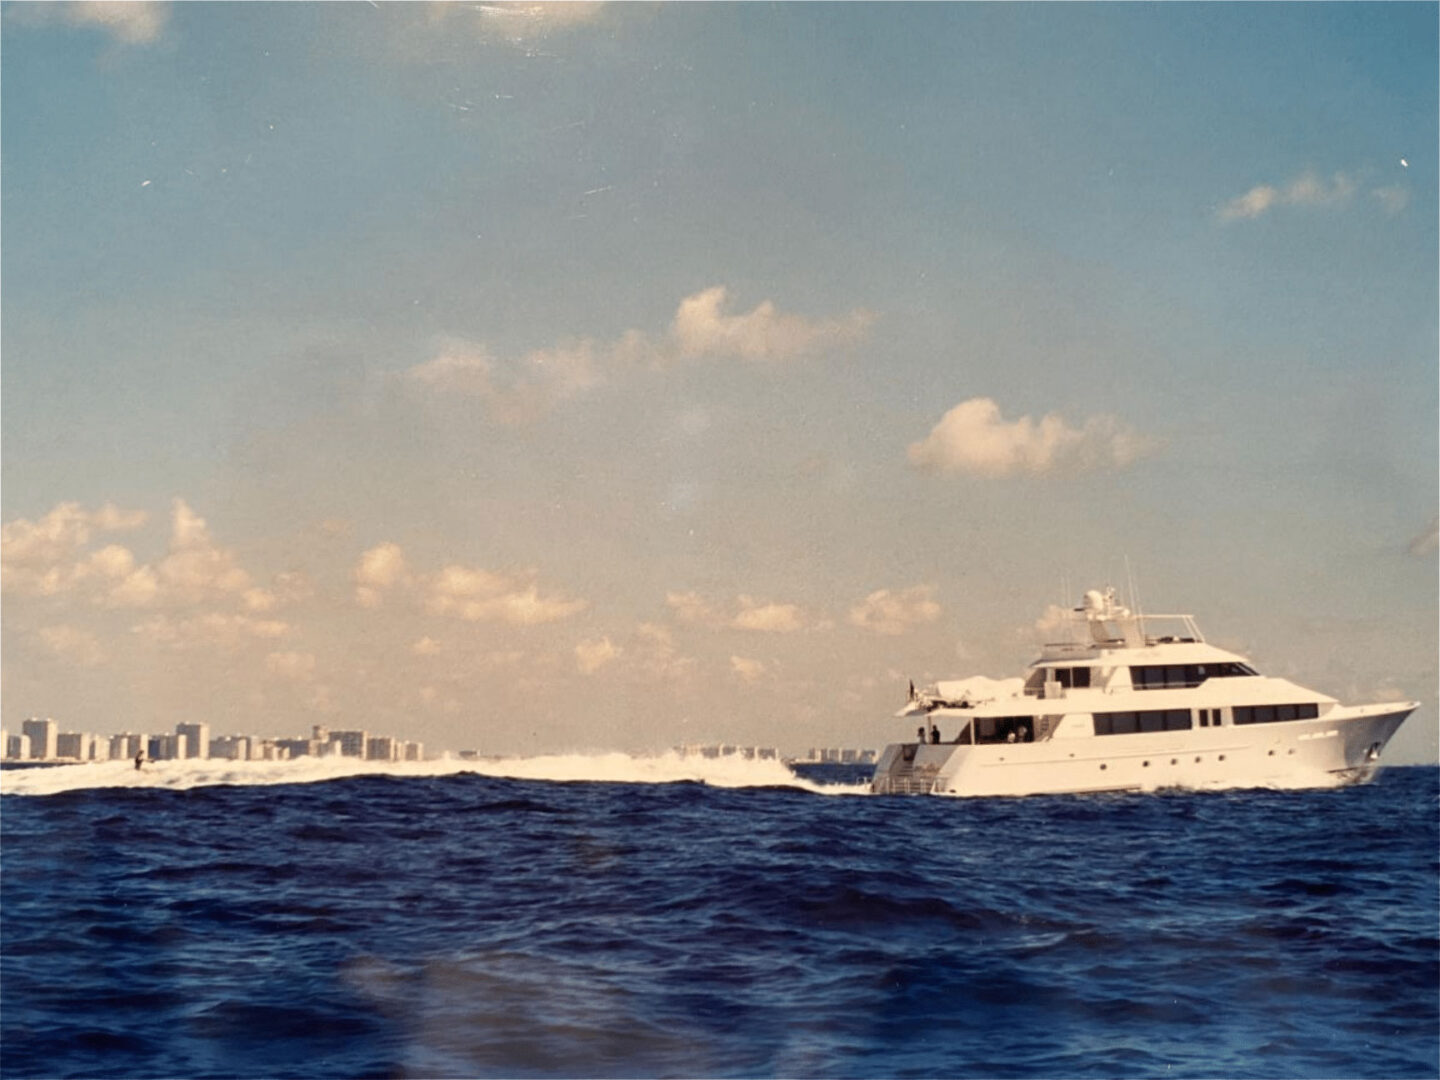 A yacht on the move with a water skiing person